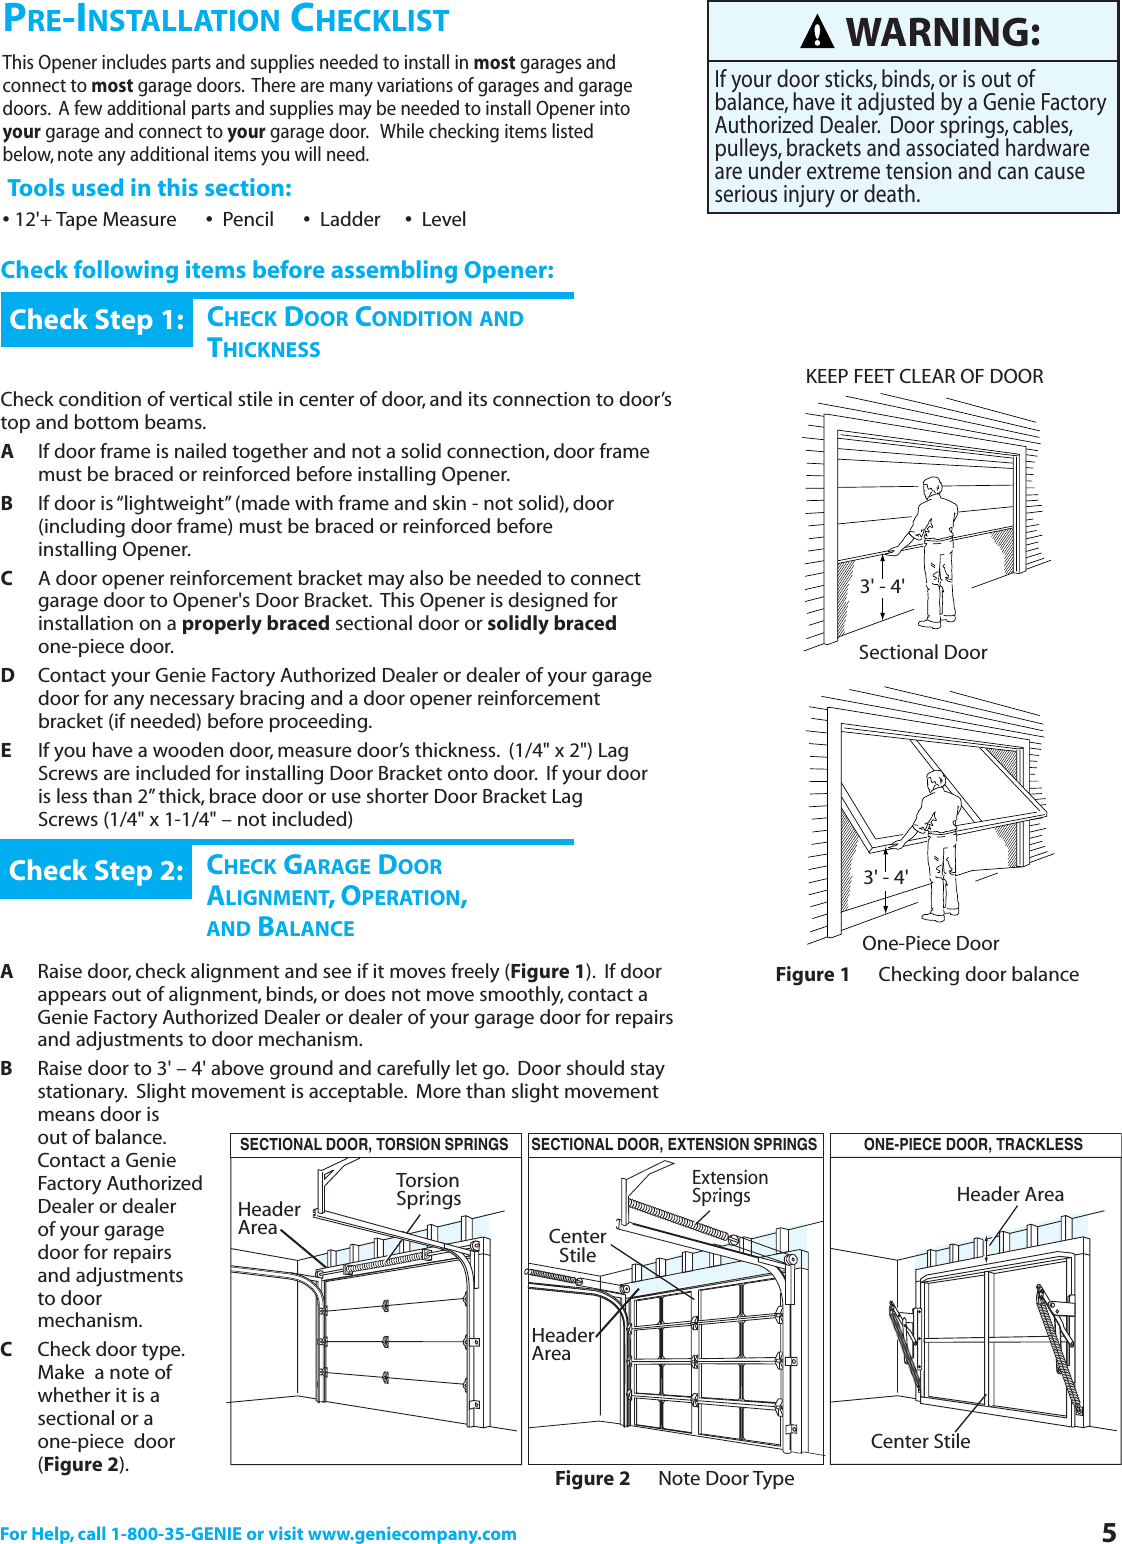 For Help, call 1-800-35-GENIE or visit www.geniecompany.com 5PRE-INSTALLATION CHECKLISTThis Opener includes parts and supplies needed to install in most garages and connect to most garage doors. There are many variations of garages and garage doors. A few additional parts and supplies may be needed to install Opener into your garage and connect to your garage door. While checking items listed below, note any additional items you will need.Tools used in this section:•12&apos;+ Tape Measure      •Pencil      •Ladder     •LevelCheck following items before assembling Opener:CHECK DOOR CONDITION ANDTHICKNESSCheck condition of vertical stile in center of door, and its connection to door’stop and bottom beams.AIf door frame is nailed together and not a solid connection, door frame must be braced or reinforced before installing Opener.BIf door is “lightweight” (made with frame and skin - not solid), door (including door frame) must be braced or reinforced before         installing Opener.CA door opener reinforcement bracket may also be needed to connect garage door to Opener&apos;s Door Bracket. This Opener is designed for installation on a properly braced sectional door or solidly bracedone-piece door.DContact your Genie Factory Authorized Dealer or dealer of your garage door for any necessary bracing and a door opener reinforcement bracket (if needed) before proceeding.EIf you have a wooden door, measure door’s thickness. (1/4&quot; x 2&quot;) Lag  Screws are included for installing Door Bracket onto door. If your door is less than 2” thick, brace door or use shorter Door Bracket Lag Screws (1/4&quot; x 1-1/4&quot; – not included)Check Step 1:CHECK GARAGE DOORALIGNMENT,OPERATION,AND BALANCEARaise door, check alignment and see if it moves freely (Figure 1). If door appears out of alignment, binds, or does not move smoothly, contact a Genie Factory Authorized Dealer or dealer of your garage door for repairs and adjustments to door mechanism.BRaise door to 3&apos; – 4&apos; above ground and carefully let go. Door should stay stationary. Slight movement is acceptable. More than slight movement means door is out of balance.Contact a Genie Factory Authorized Dealer or dealer of your garage door for repairs and adjustments to door mechanism.CCheck door type.Make  a note of whether it is asectional or a one-piece  door(Figure 2).Check Step 2:WARNING:If your door sticks, binds, or is out of balance, have it adjusted by a Genie FactoryAuthorized Dealer. Door springs, cables,pulleys, brackets and associated hardwareare under extreme tension and can causeserious injury or death.KEEP FEET CLEAR OF DOOR3&apos; - 4&apos;Sectional Door3&apos; - 4&apos;One-Piece DoorFigure 1 Checking door balanceFigure 2 Note Door TypeTorsion SpringsExtension SpringsCenterStileCenter StileHeader AreaHeader AreaHeader AreaSECTIONAL DOOR, TORSION SPRINGS SECTIONAL DOOR, EXTENSION SPRINGS ONE-PIECE DOOR, TRACKLESS